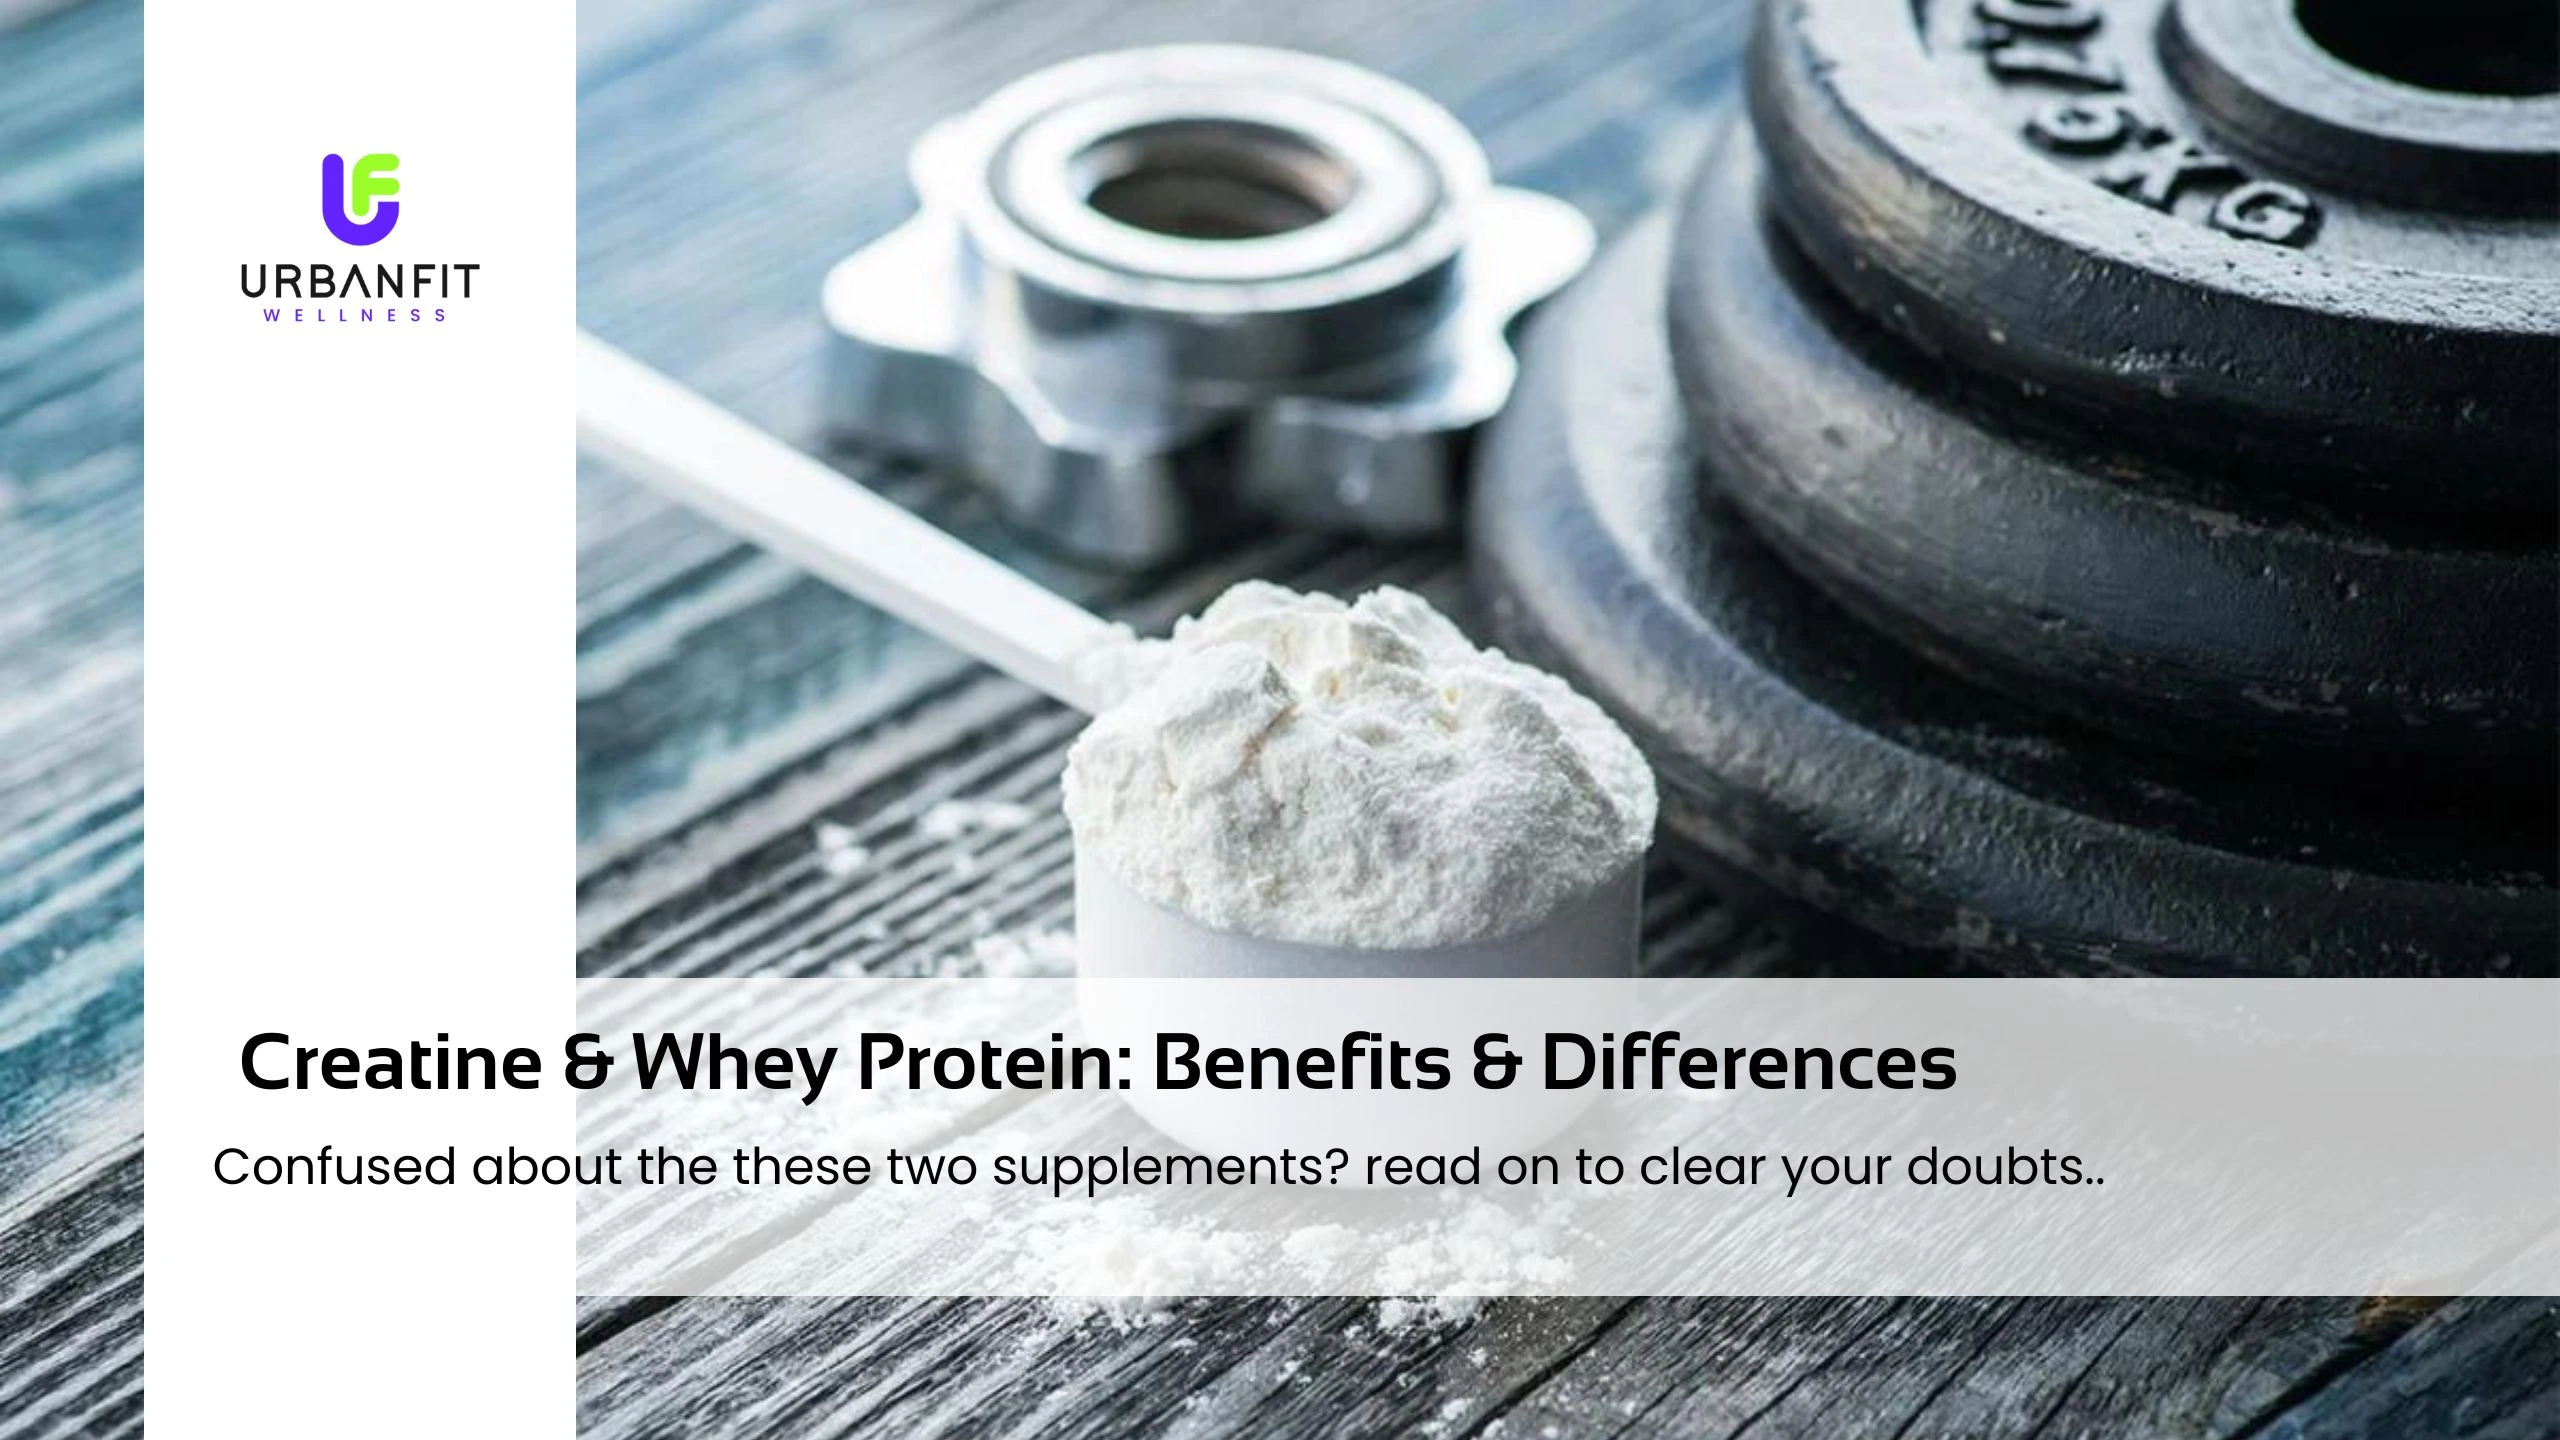 Creatine & Whey Protein : Benefits & Differences